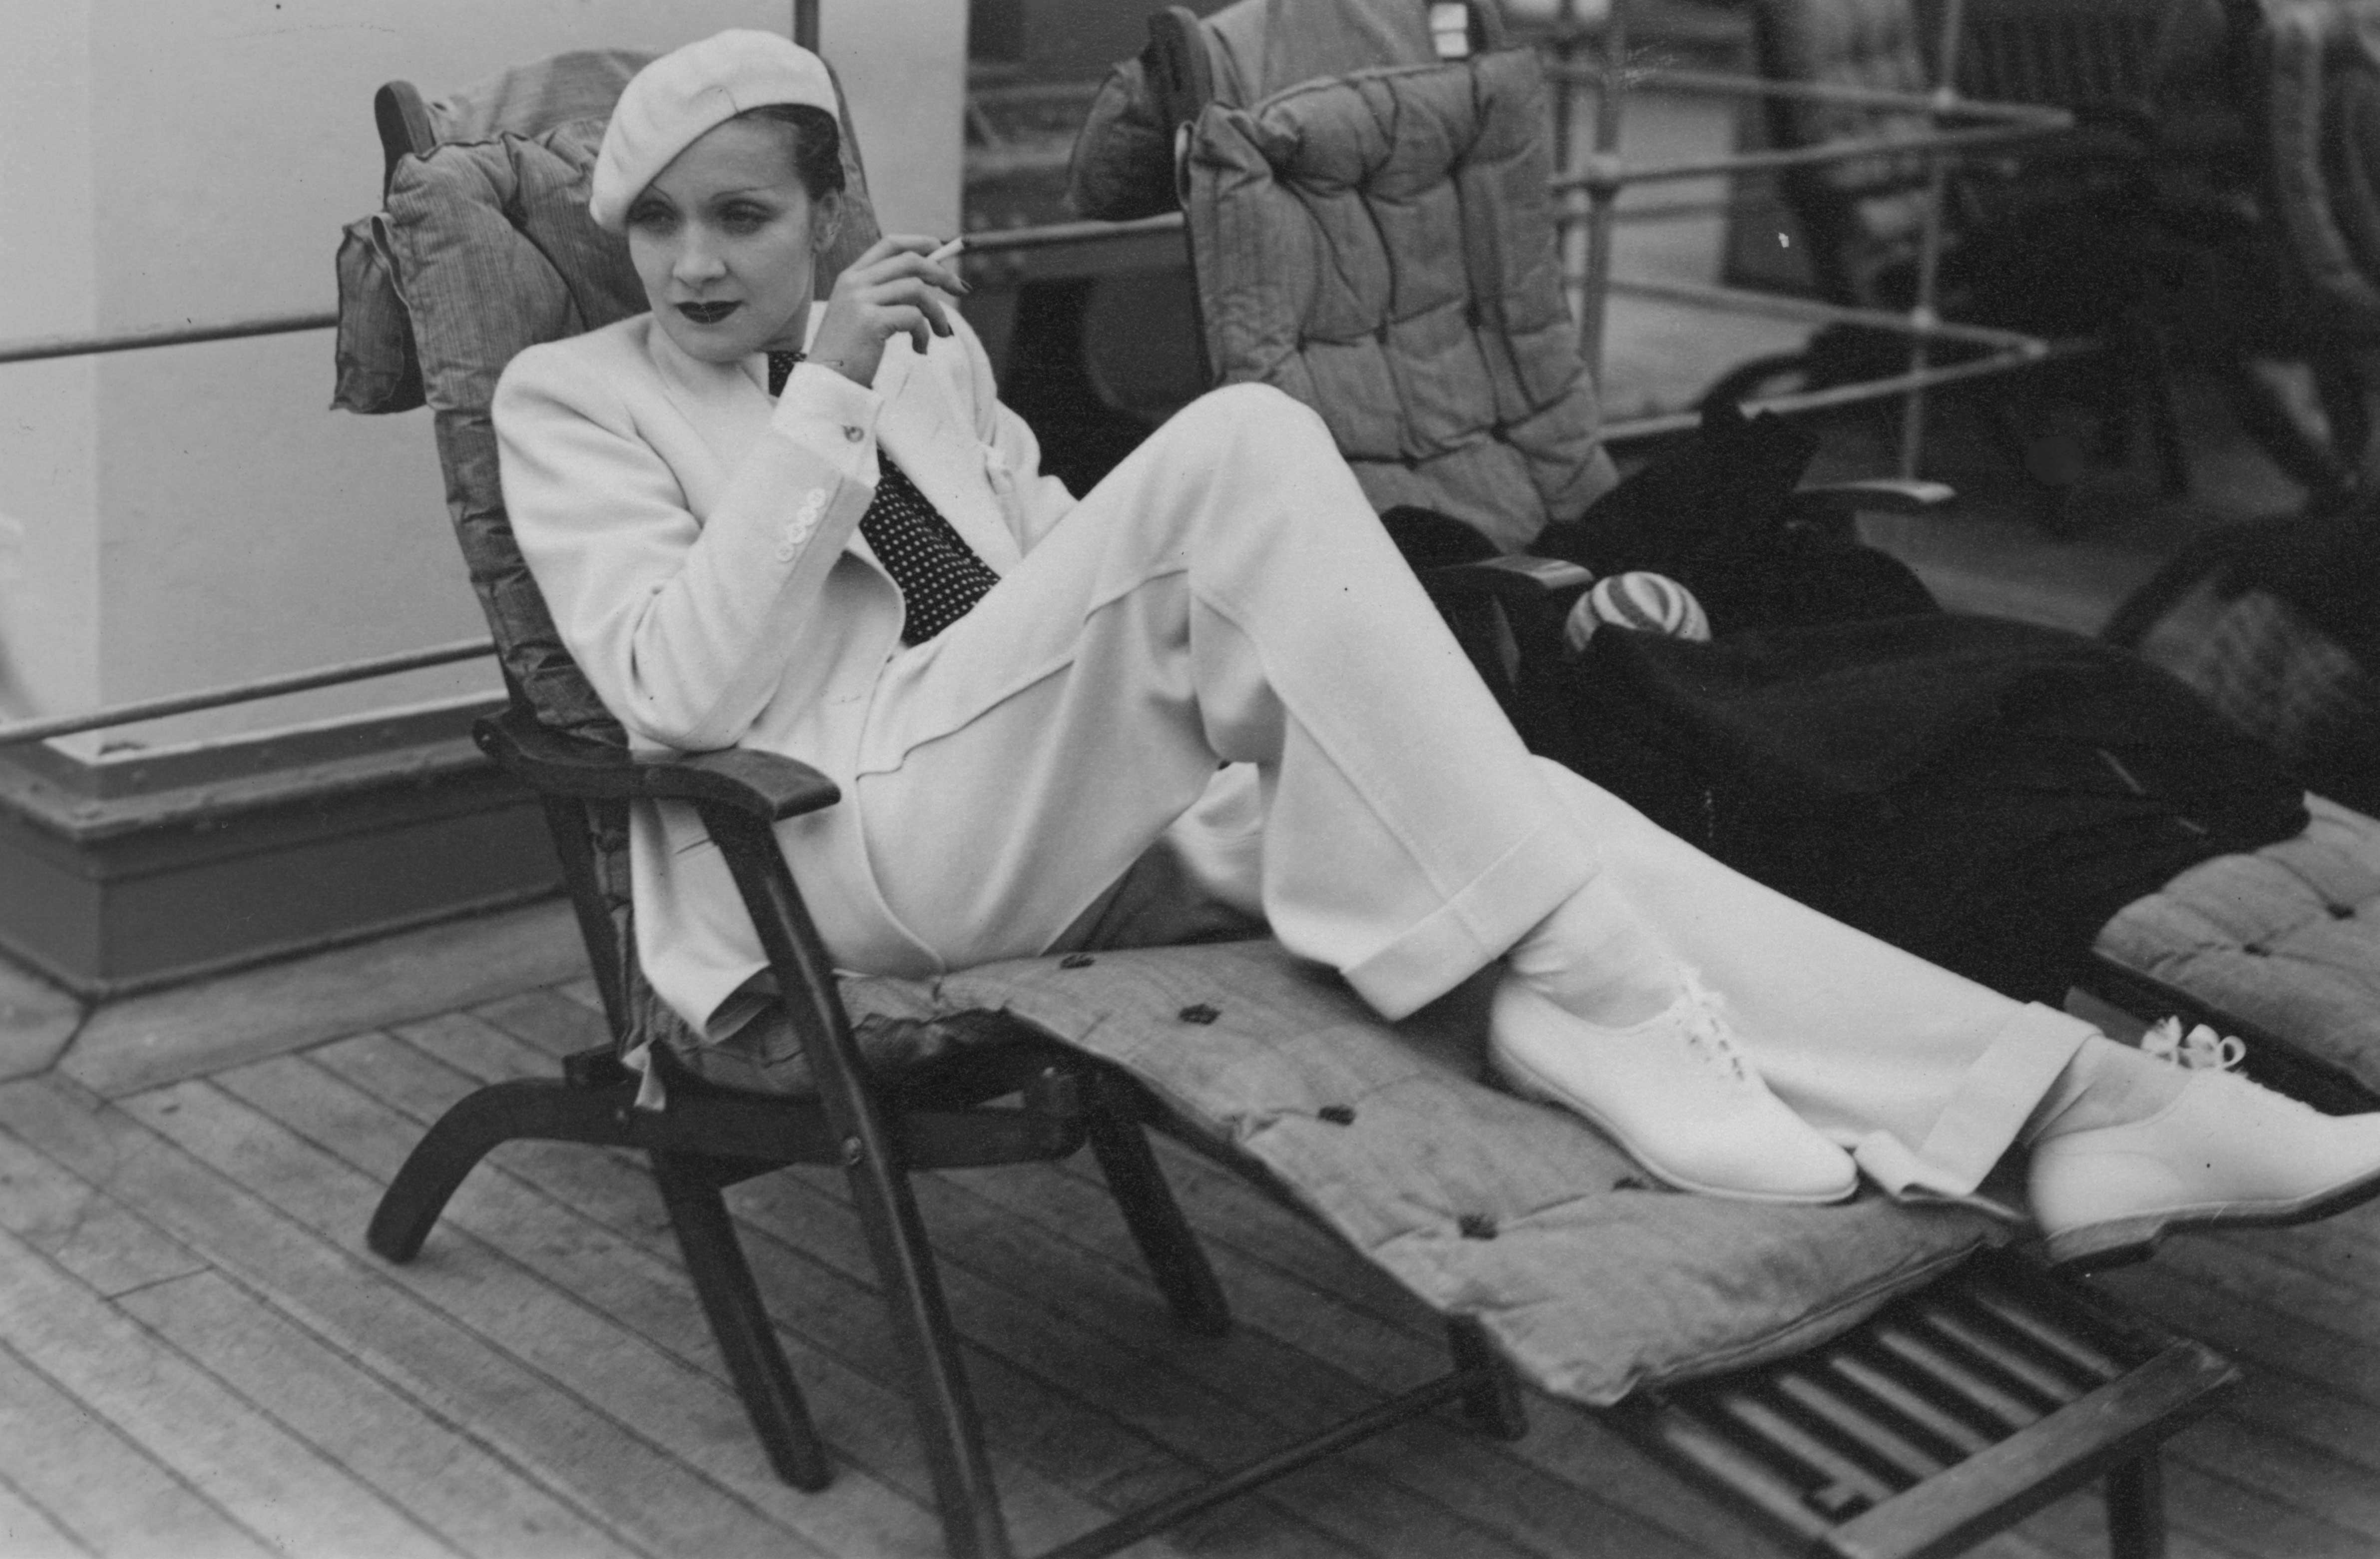 Black and white image of a woman smoking on a chaise lounge